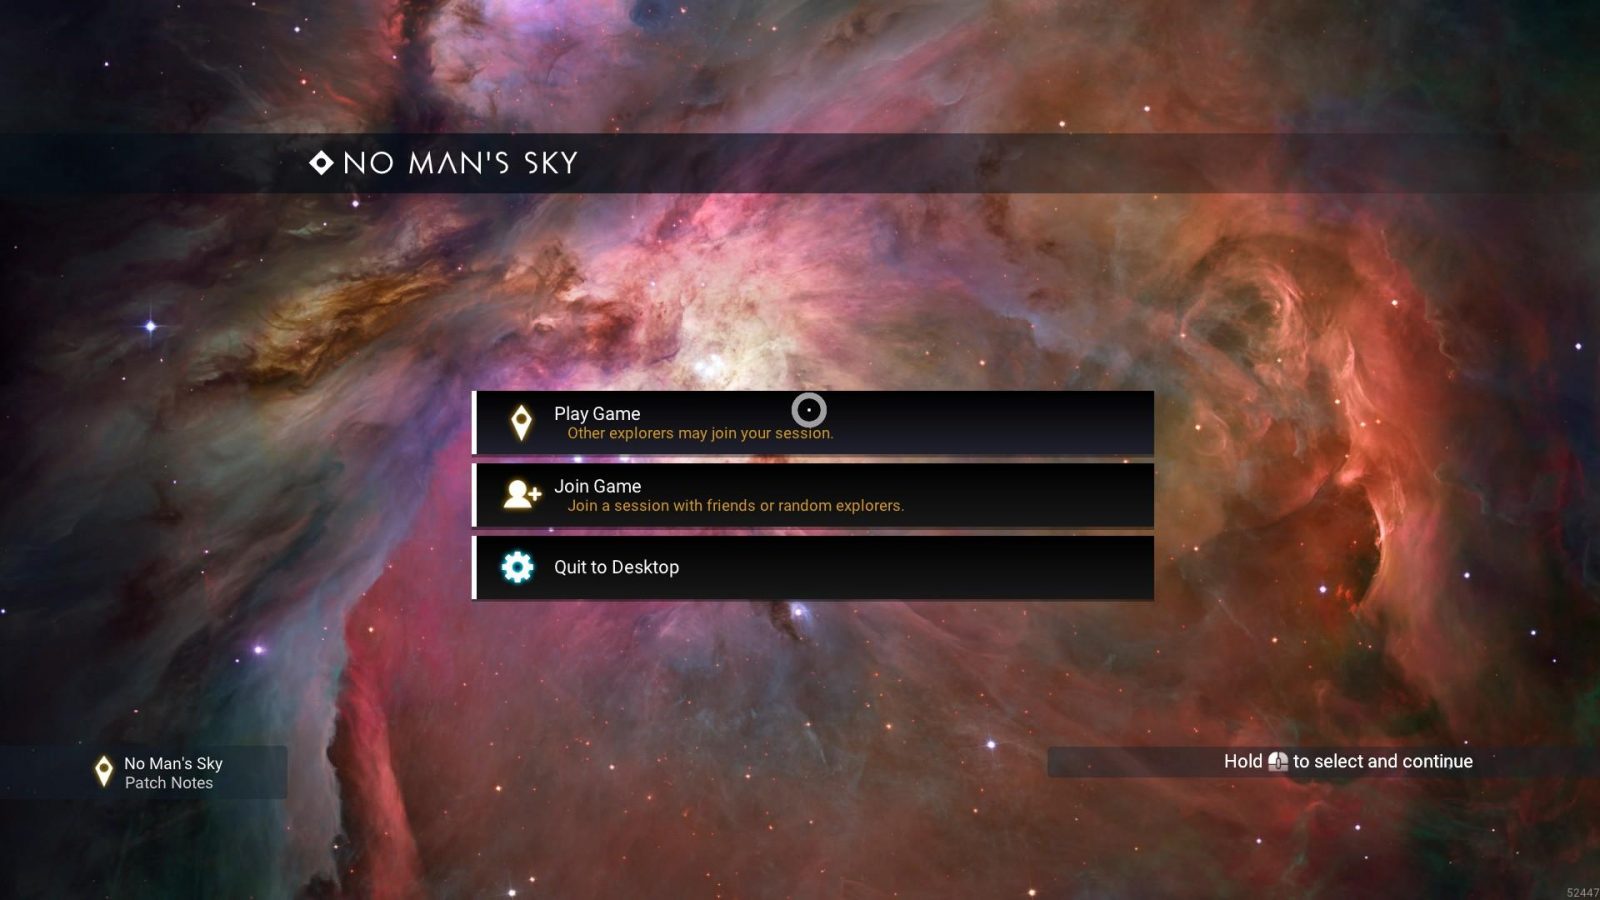 Menu Manager for NMS